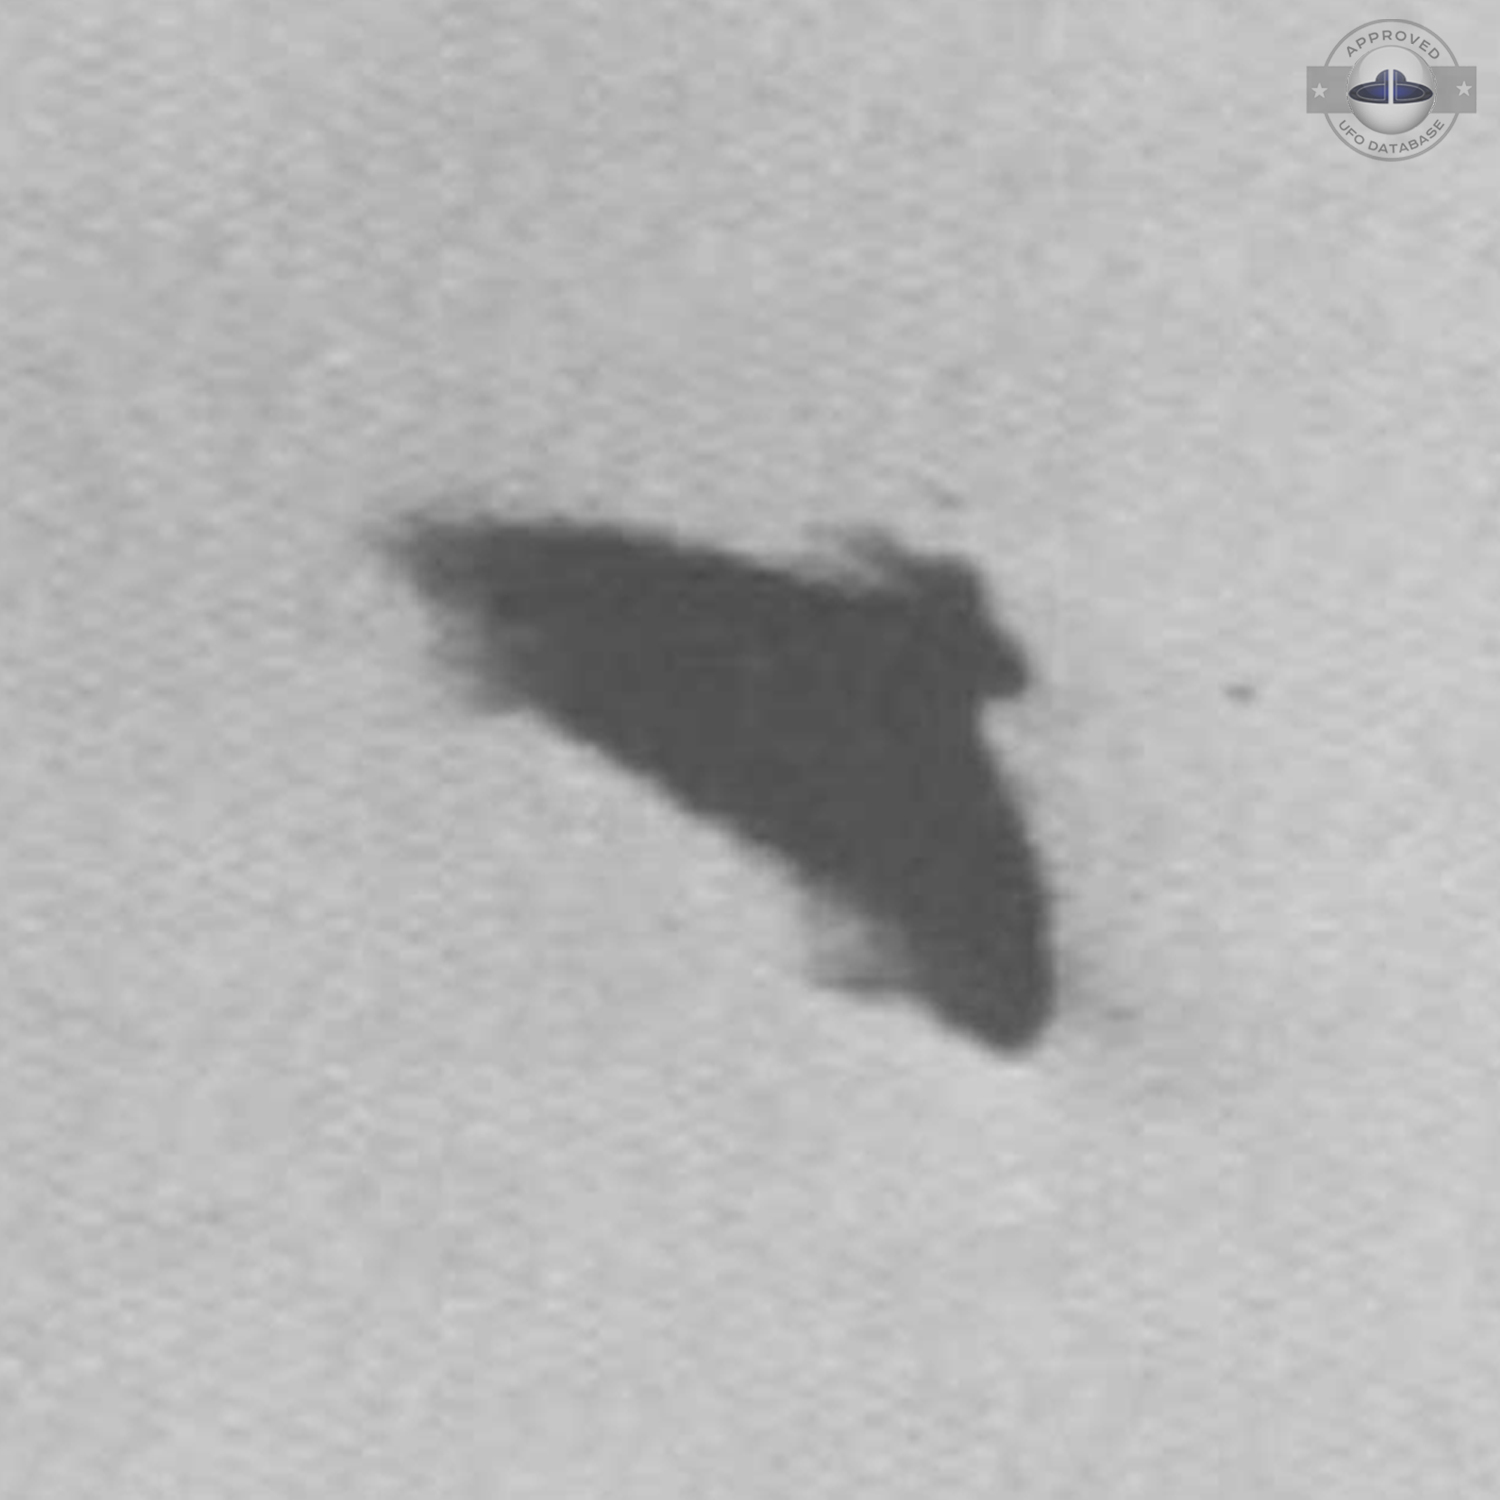 Bell Shaped UFO caught on picture in May 1975 in Chiba, Japan - Asia UFO Picture #447-3